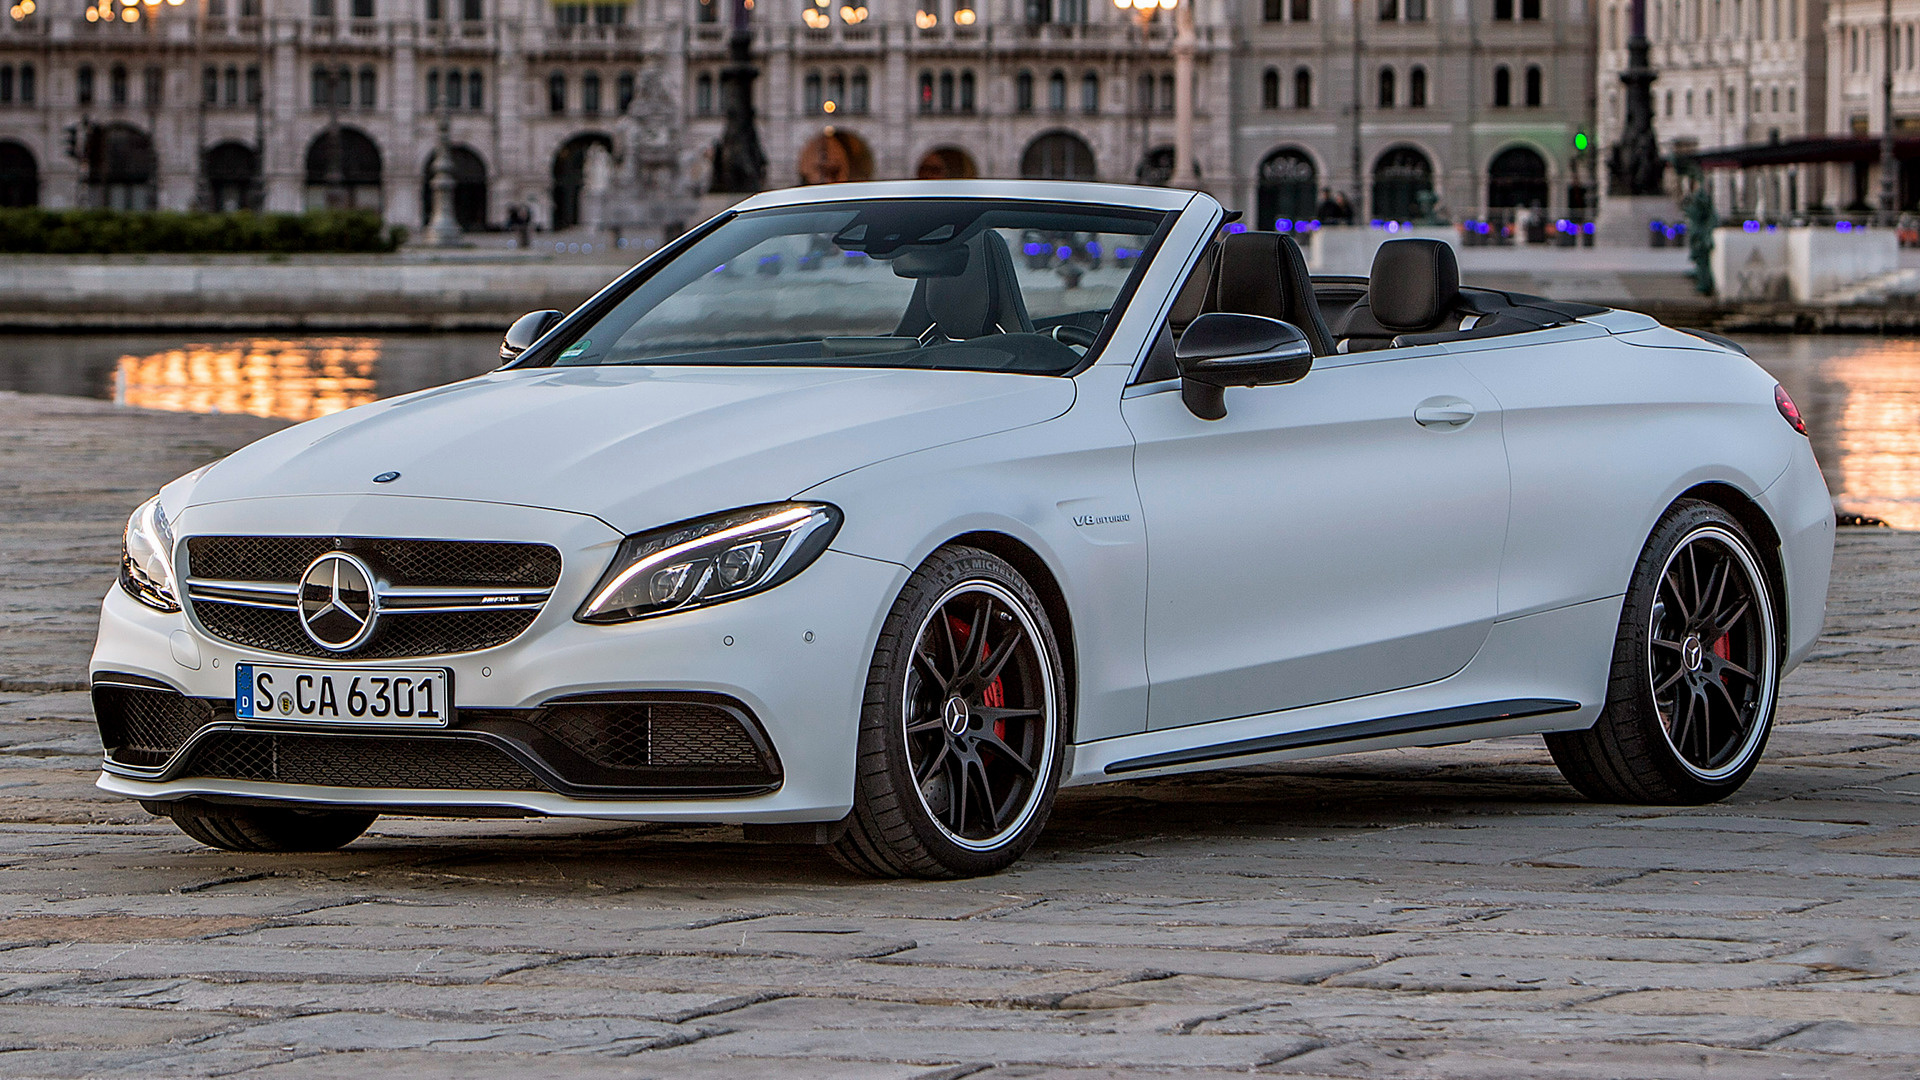 2016 Mercedes-AMG C 63 S Cabriolet - Wallpapers and HD Images | Car Pixel